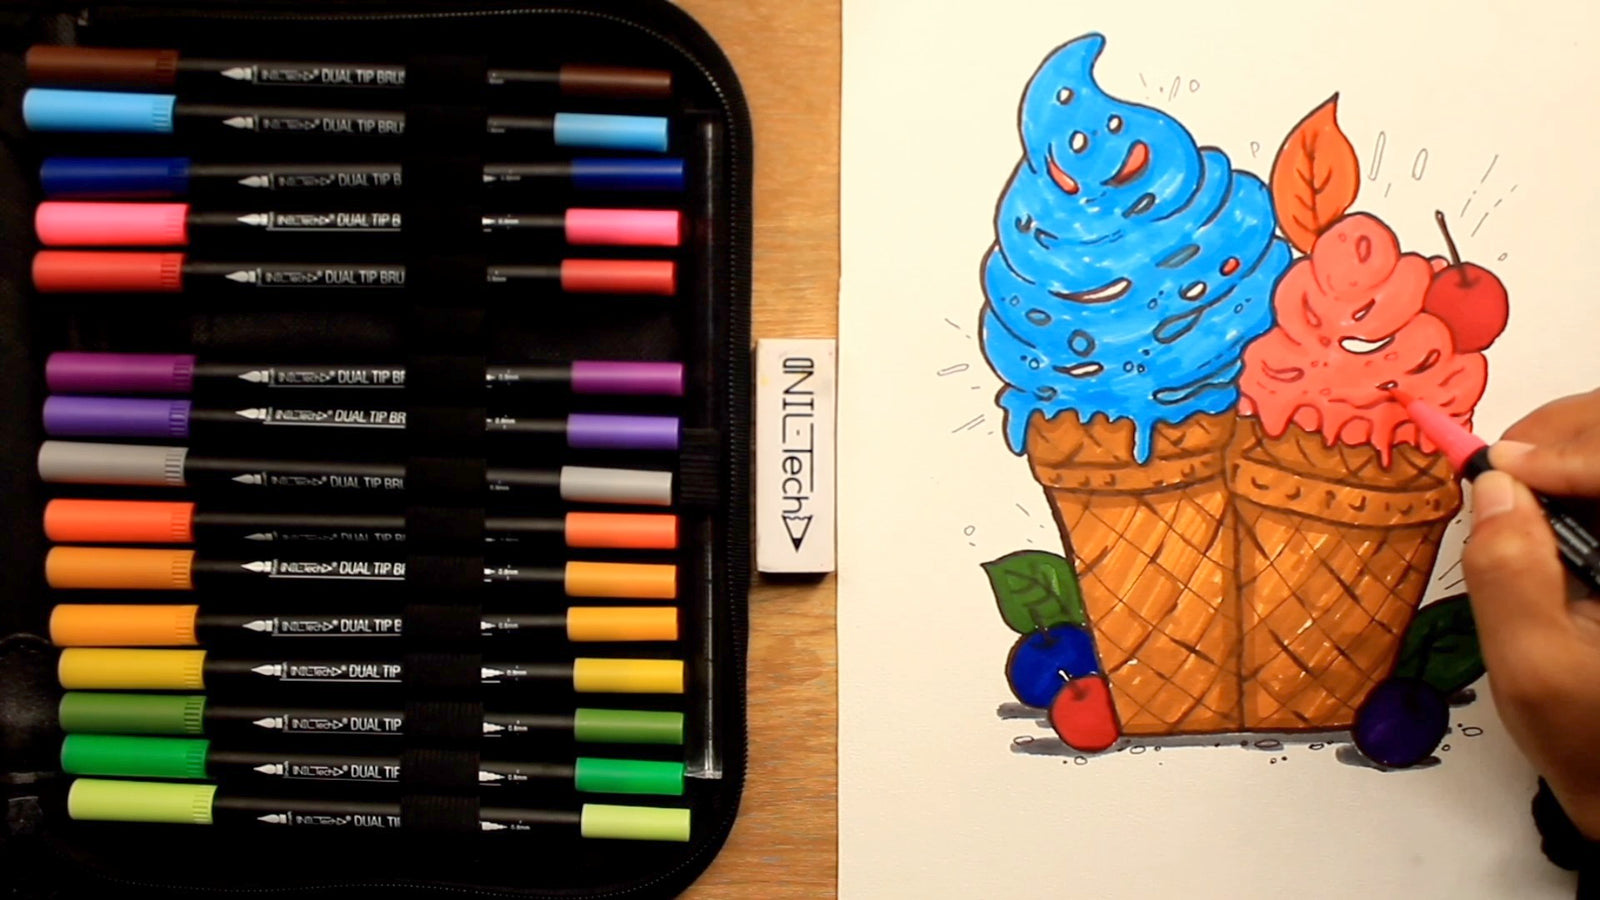 How to draw cute Ice cream for Valentine's Day, Draw cute things - YouTube